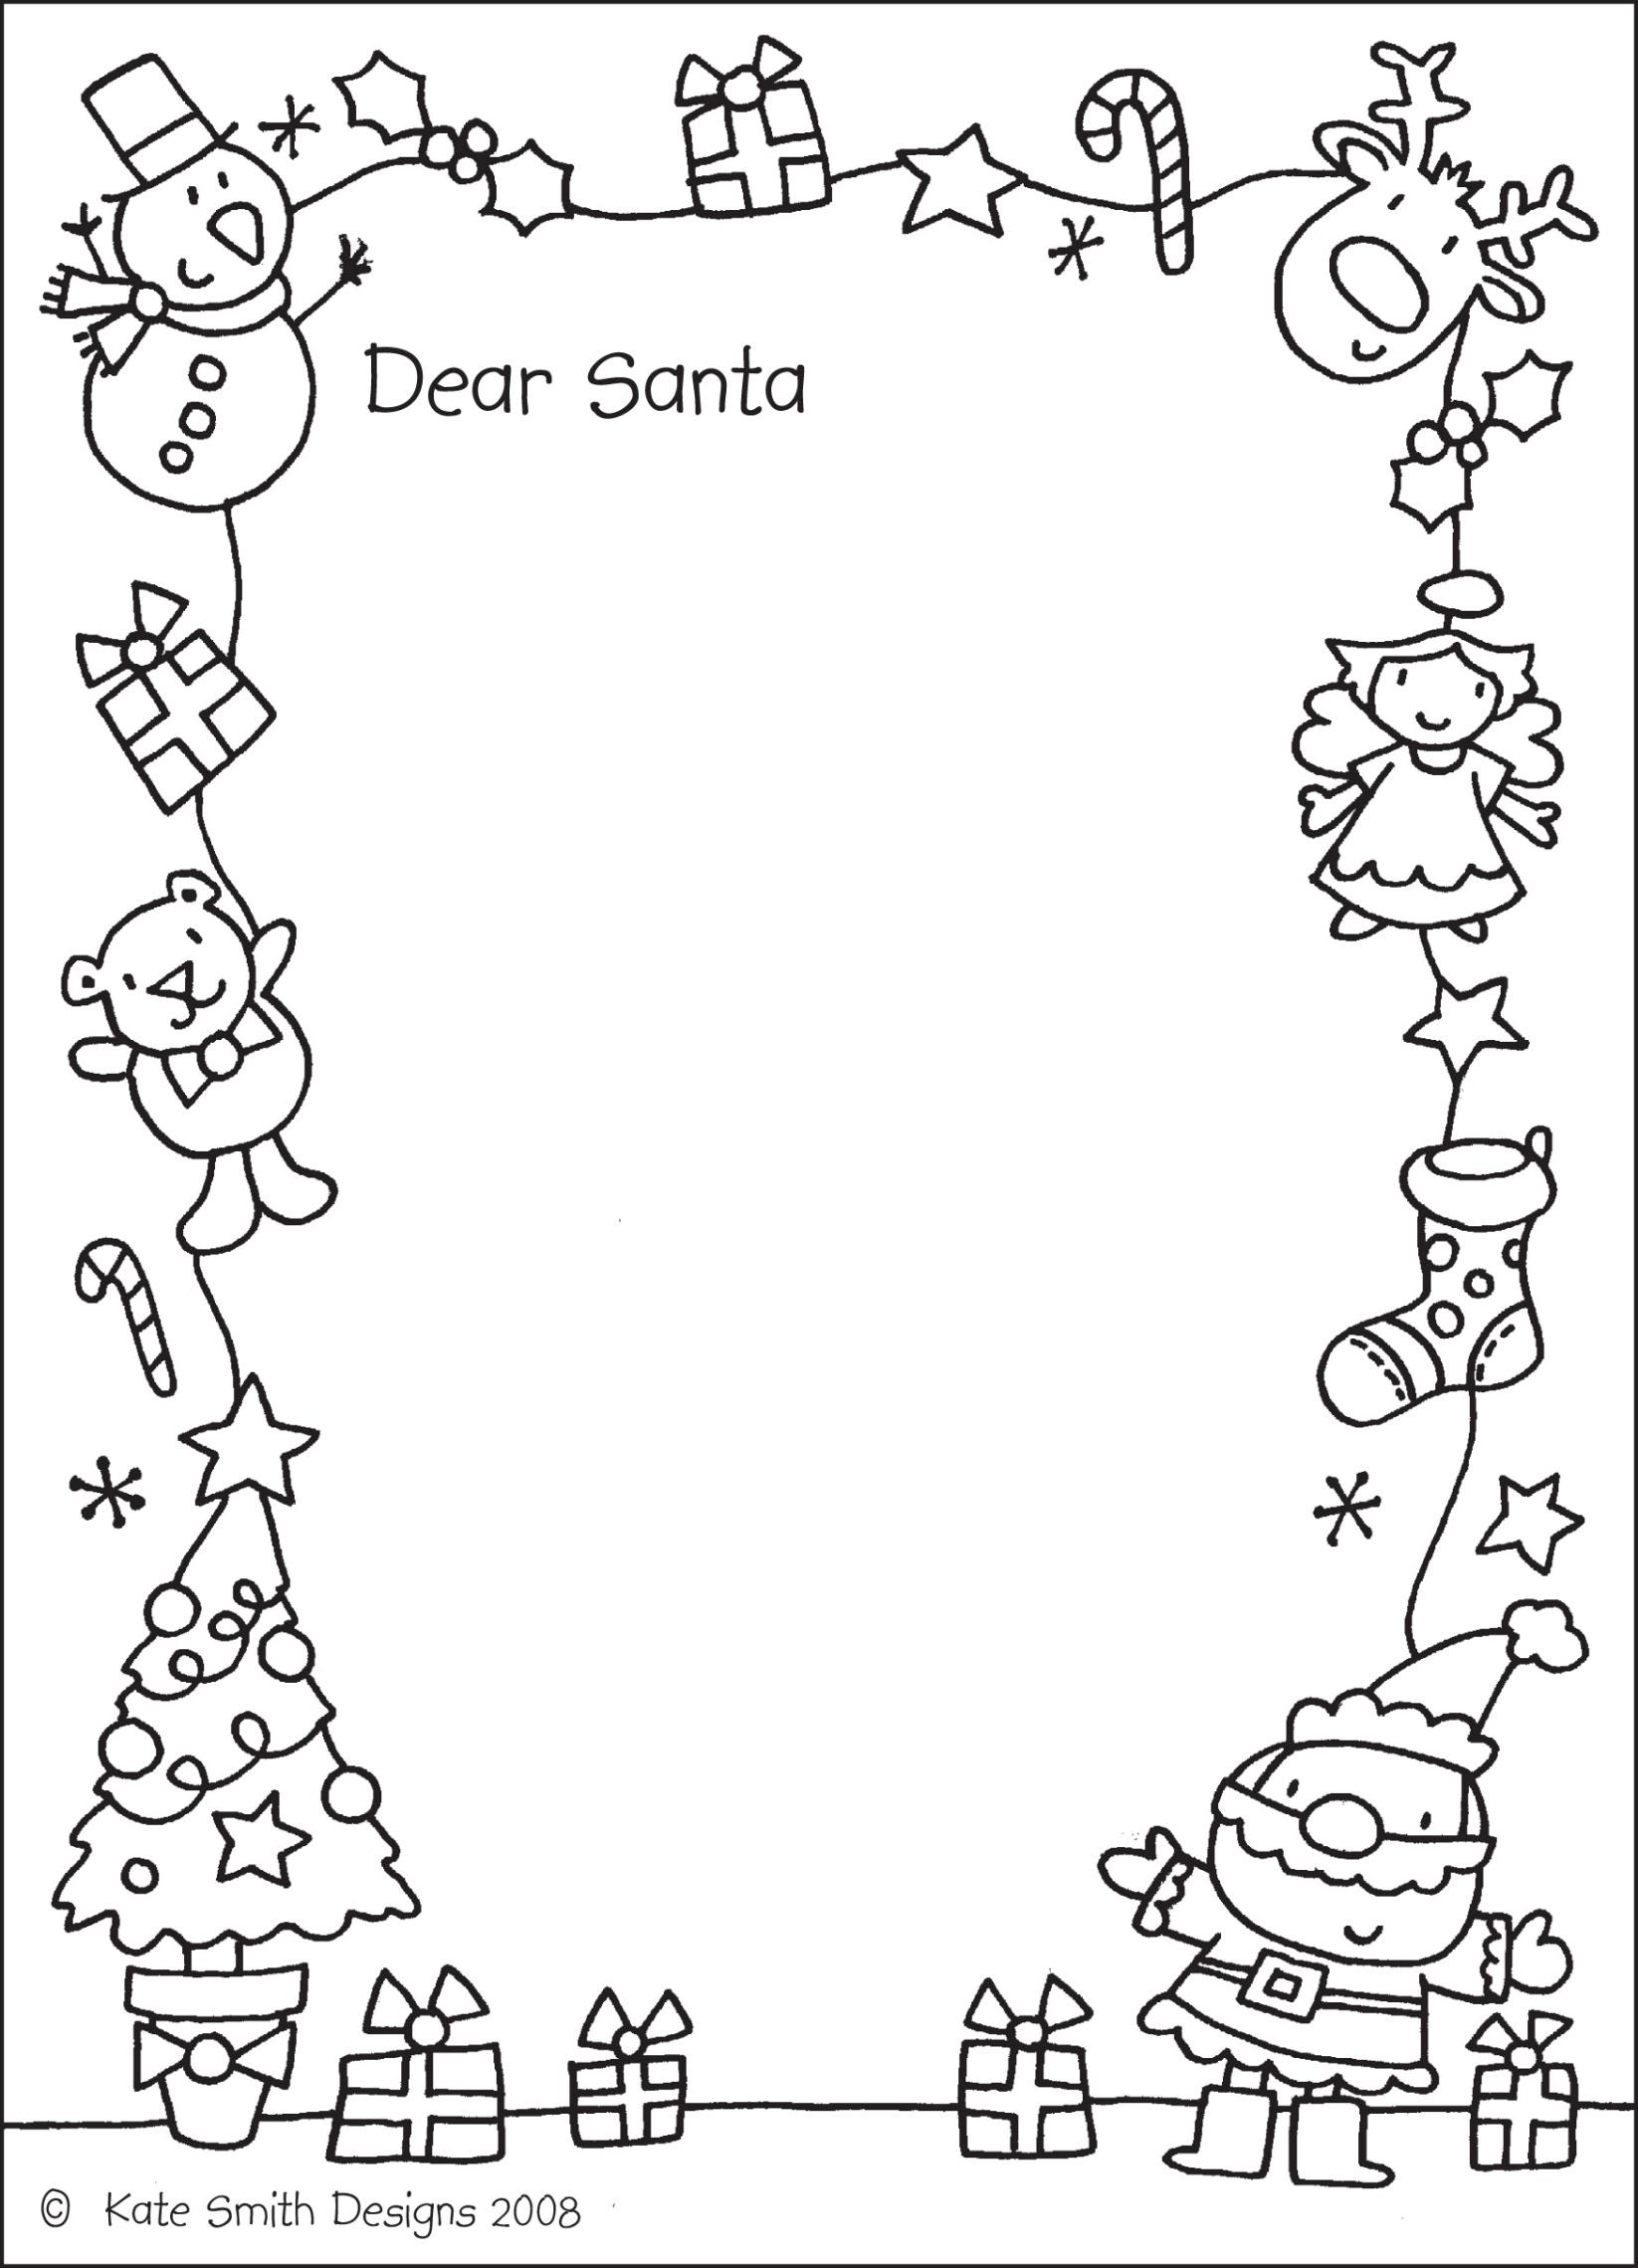 a-letter-to-santa